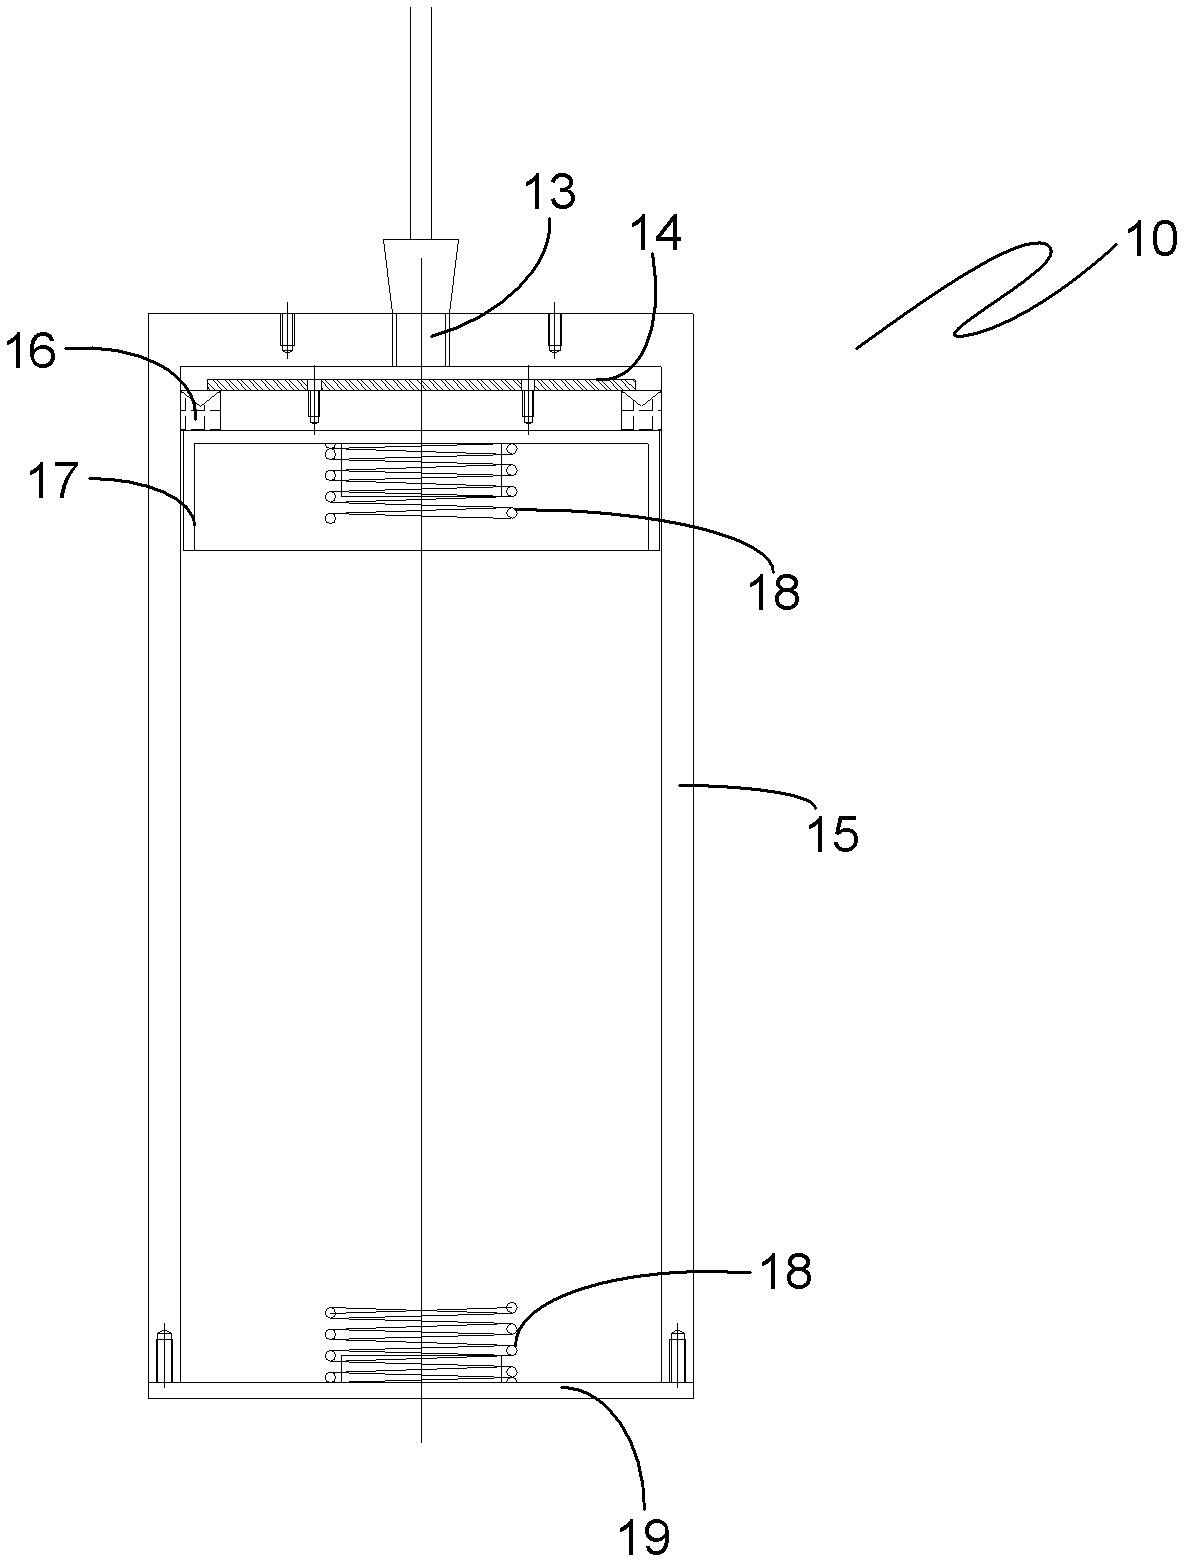 Hydraulic electromagnetic generation device for collecting idle kinetic energy of vehicles